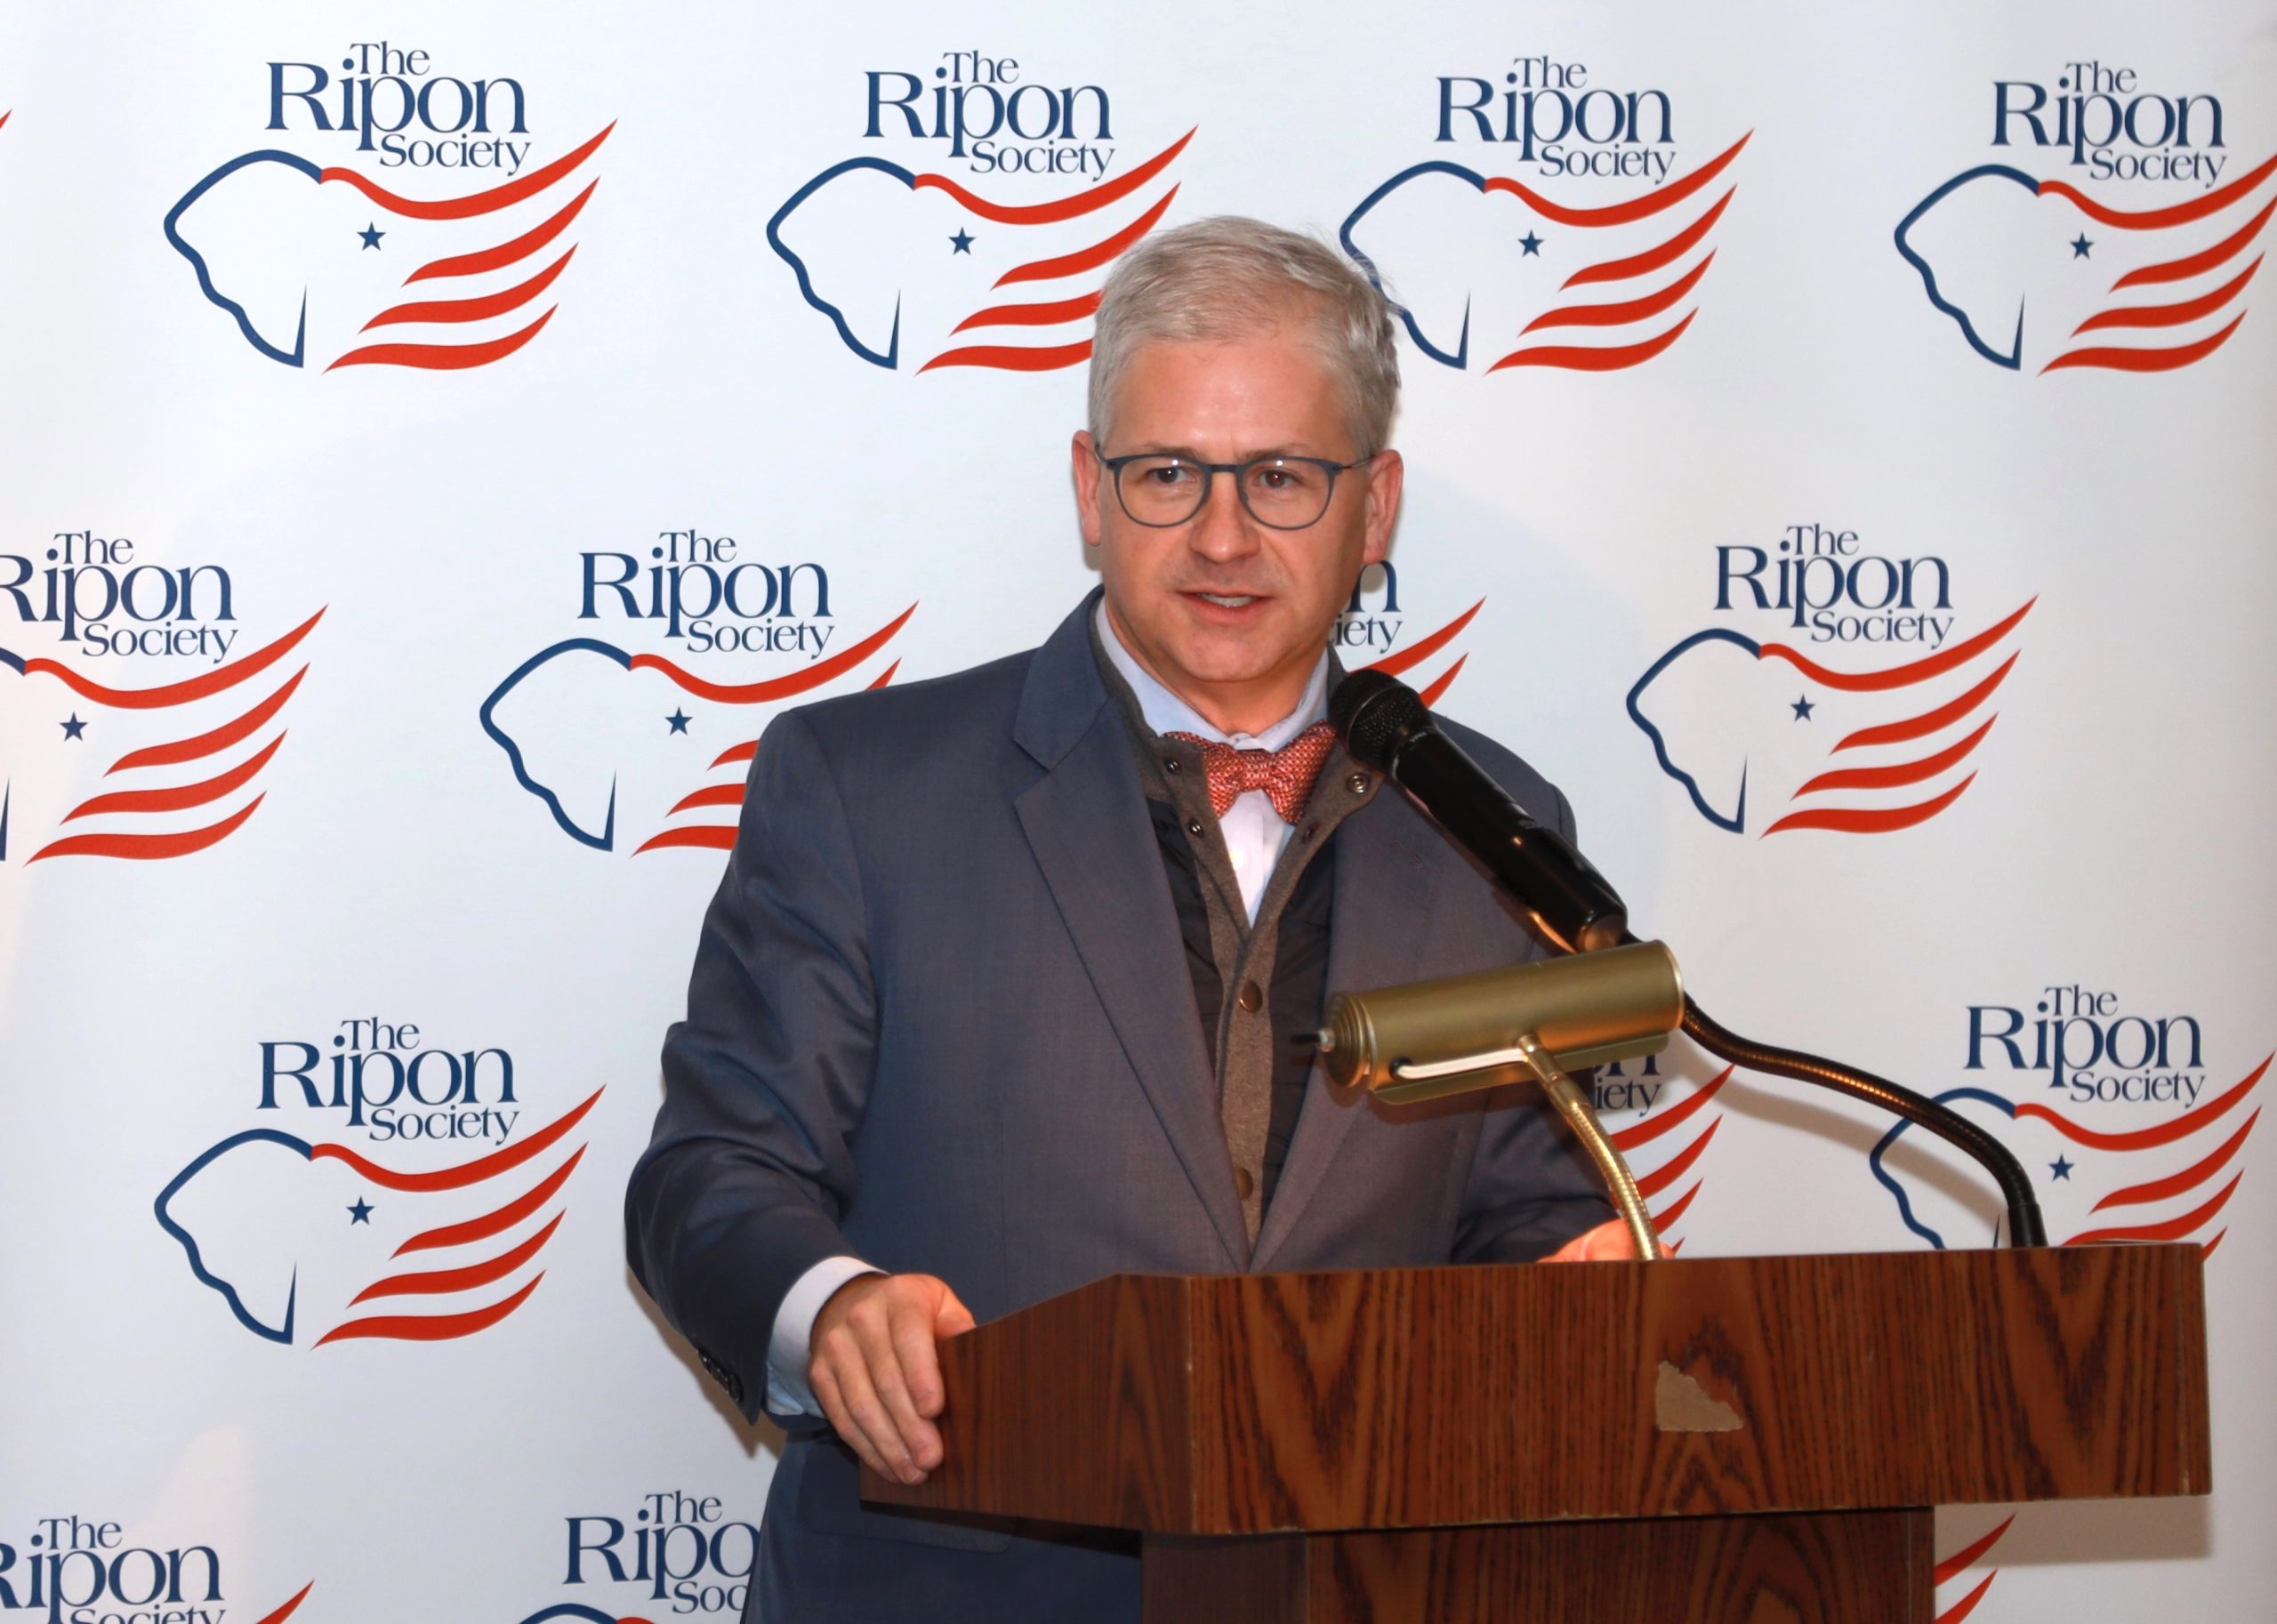 McHenry Shares His Thoughts on the “Value of House Republicans” in Review of 2023 Accomplishments